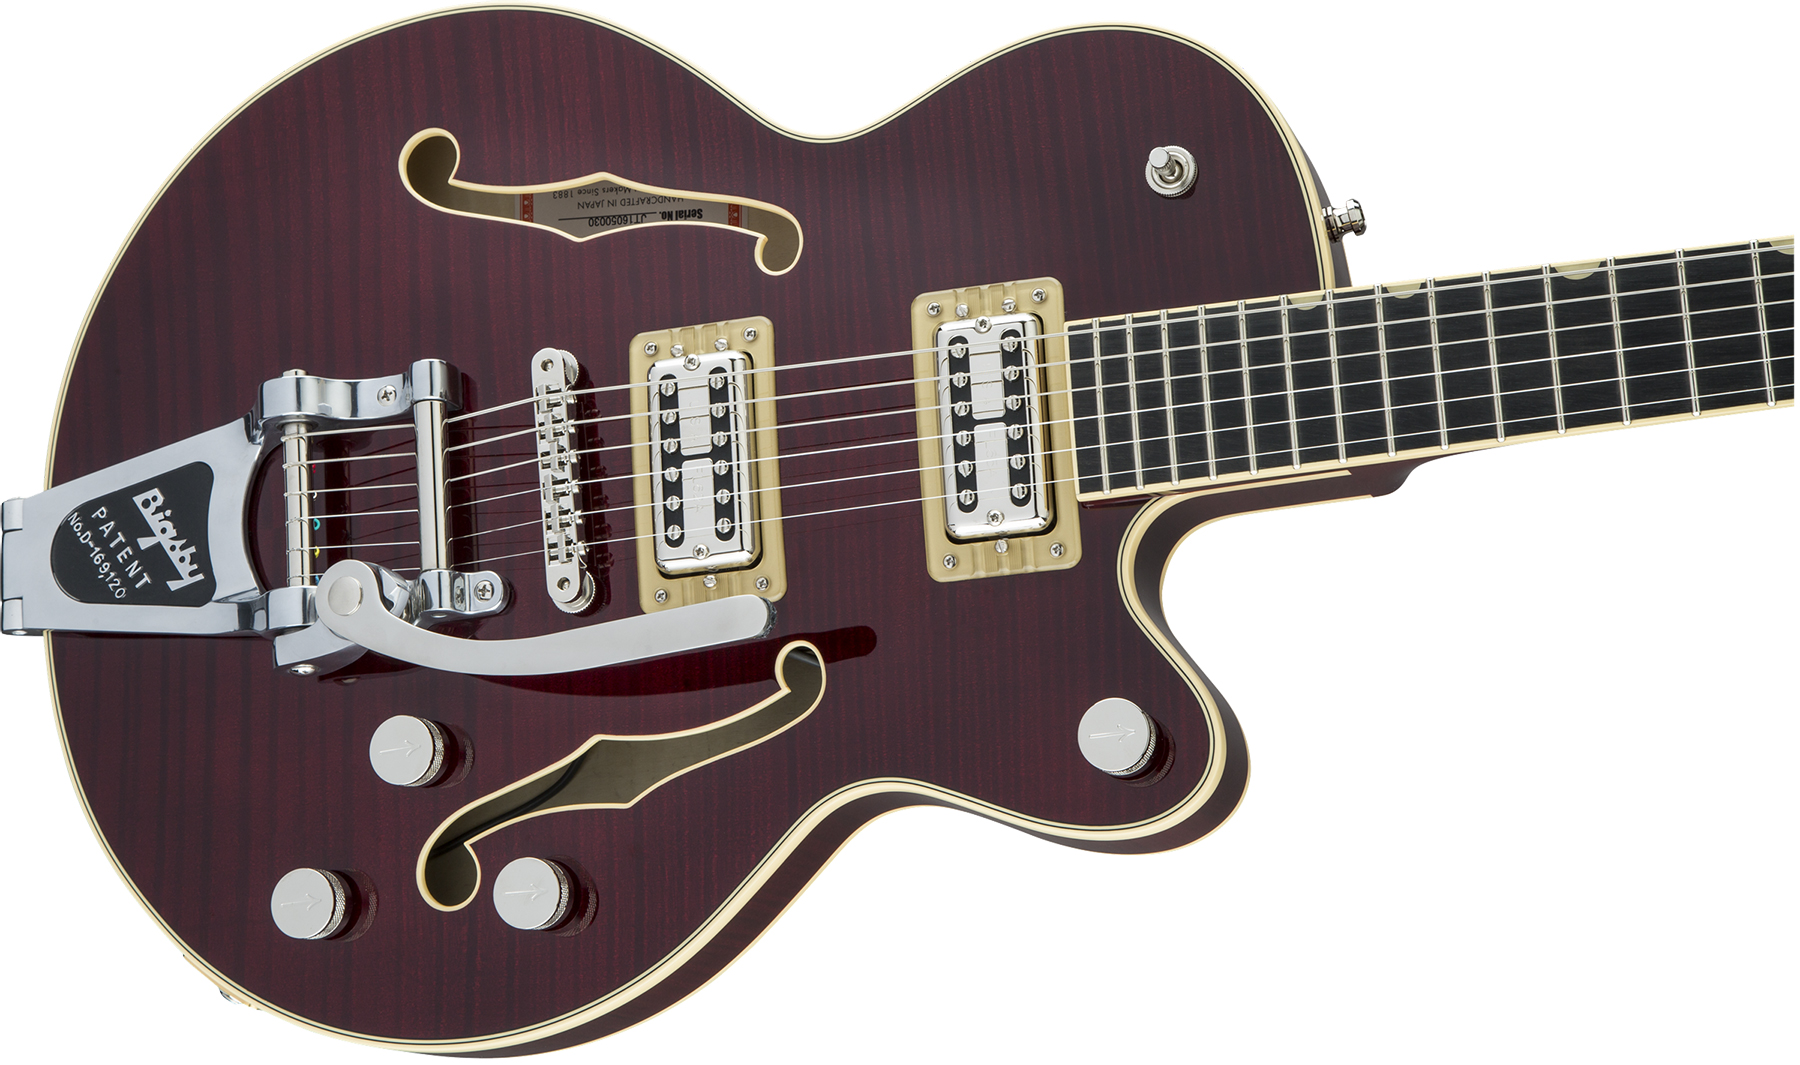 Gretsch G6659tfm Broadkaster Jr Center Bloc Players Edition Pro Jap Bigsby Eb - Dark Cherry Stain - Semi-hollow electric guitar - Variation 2